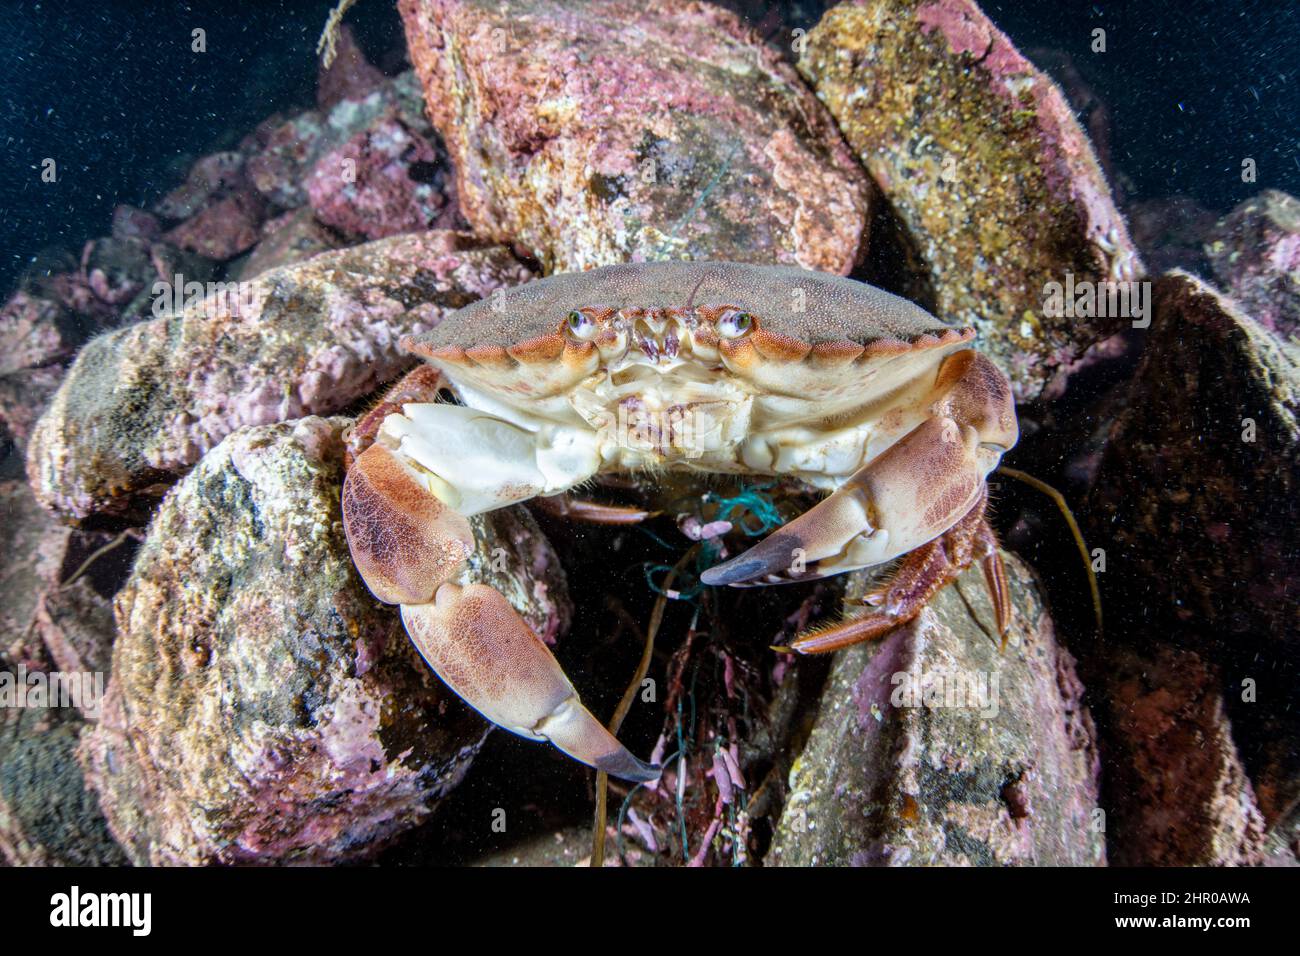 Edible crab, Cancer pagurus, Flatanger, coastal commune in central Norway, north of the Trondheimfjord, North Atlantic Ocean. Stock Photo